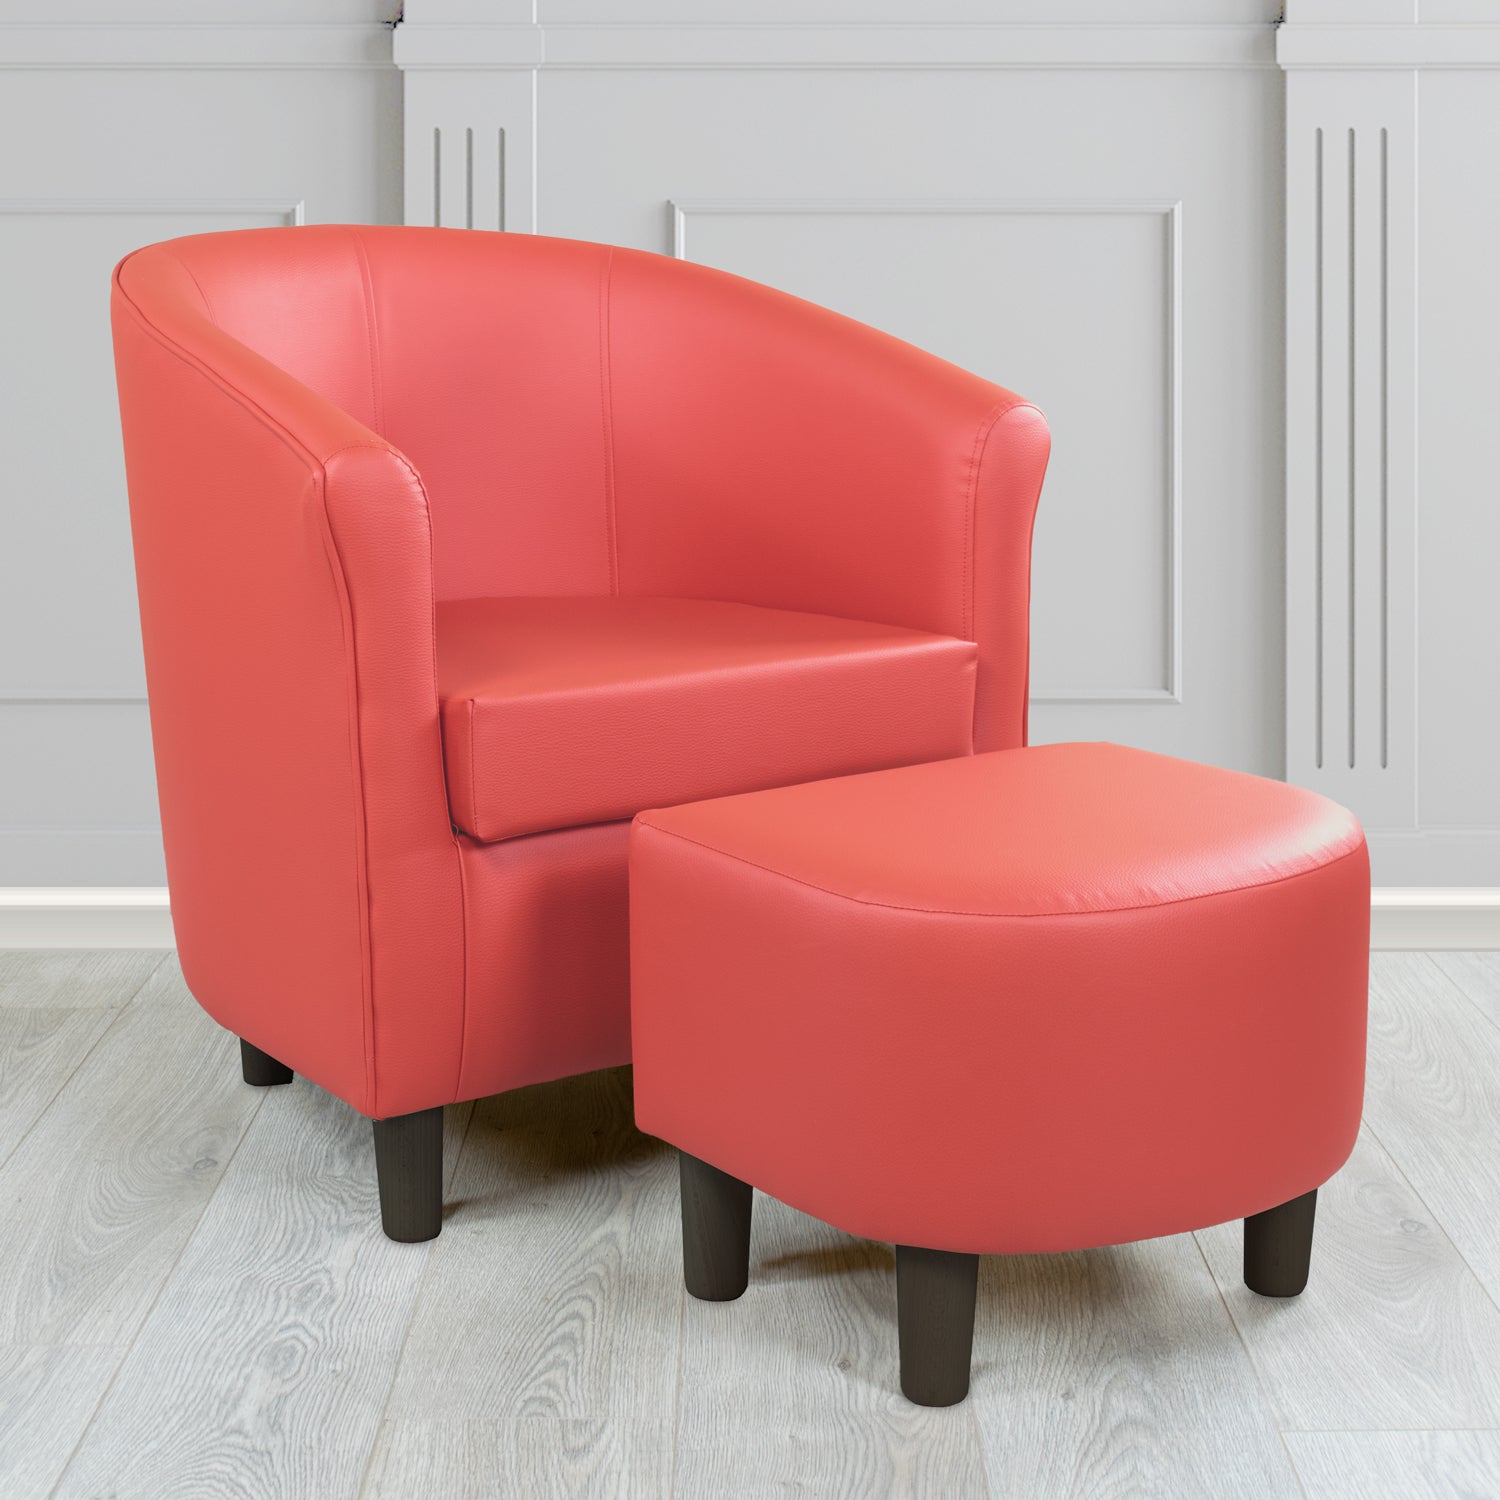 Tuscany Just Colour Coral Faux Leather Tub Chair with Dee Footstool Set - The Tub Chair Shop